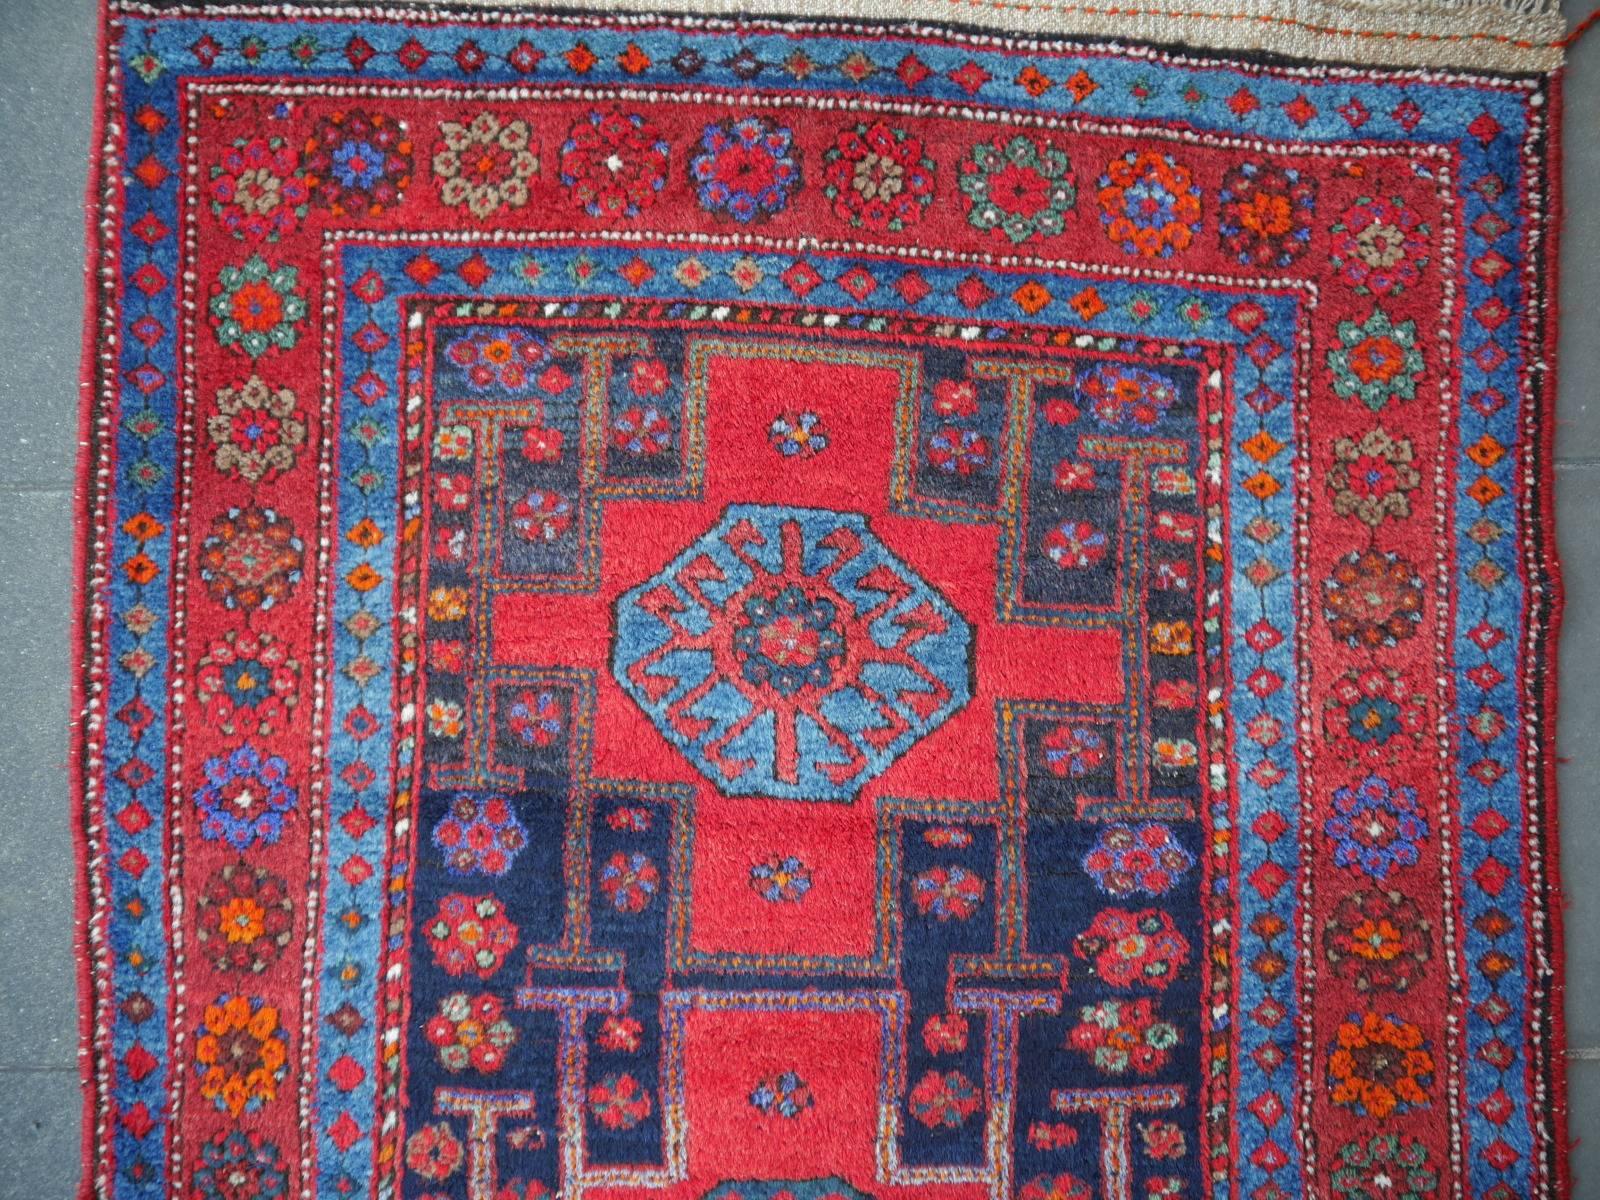 Wool Shirvan Caucasian Vintage Carpet with Vibrant Colors Red Blue Orange Green